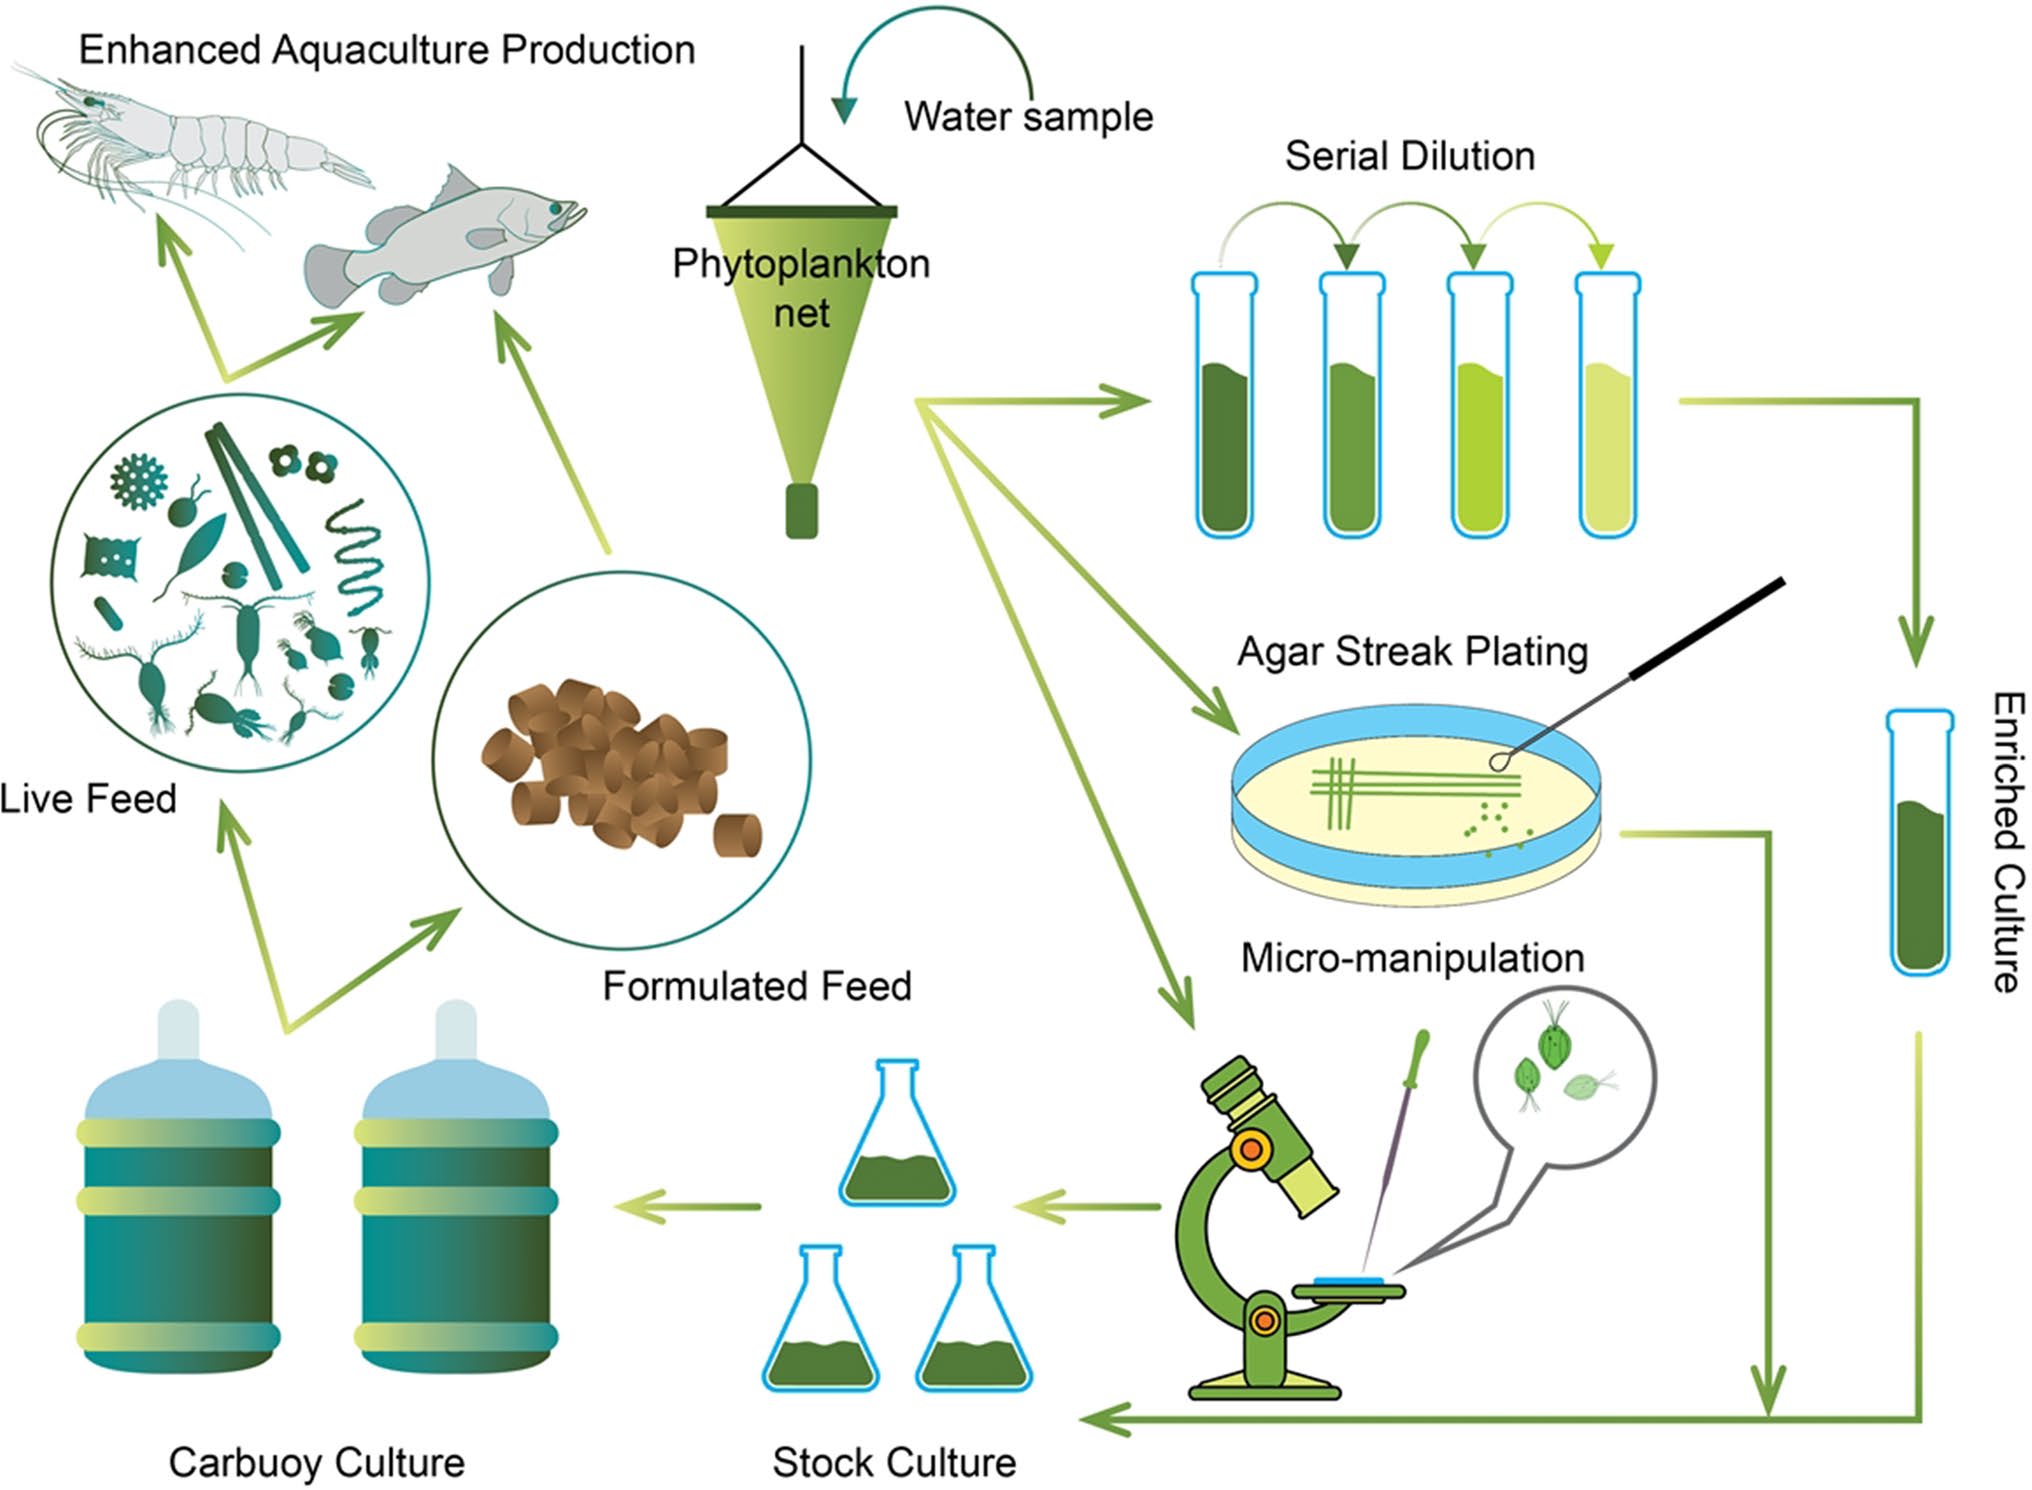 Nutraceutical potential of microalgae: a case study from a tropical estuary in Southern India